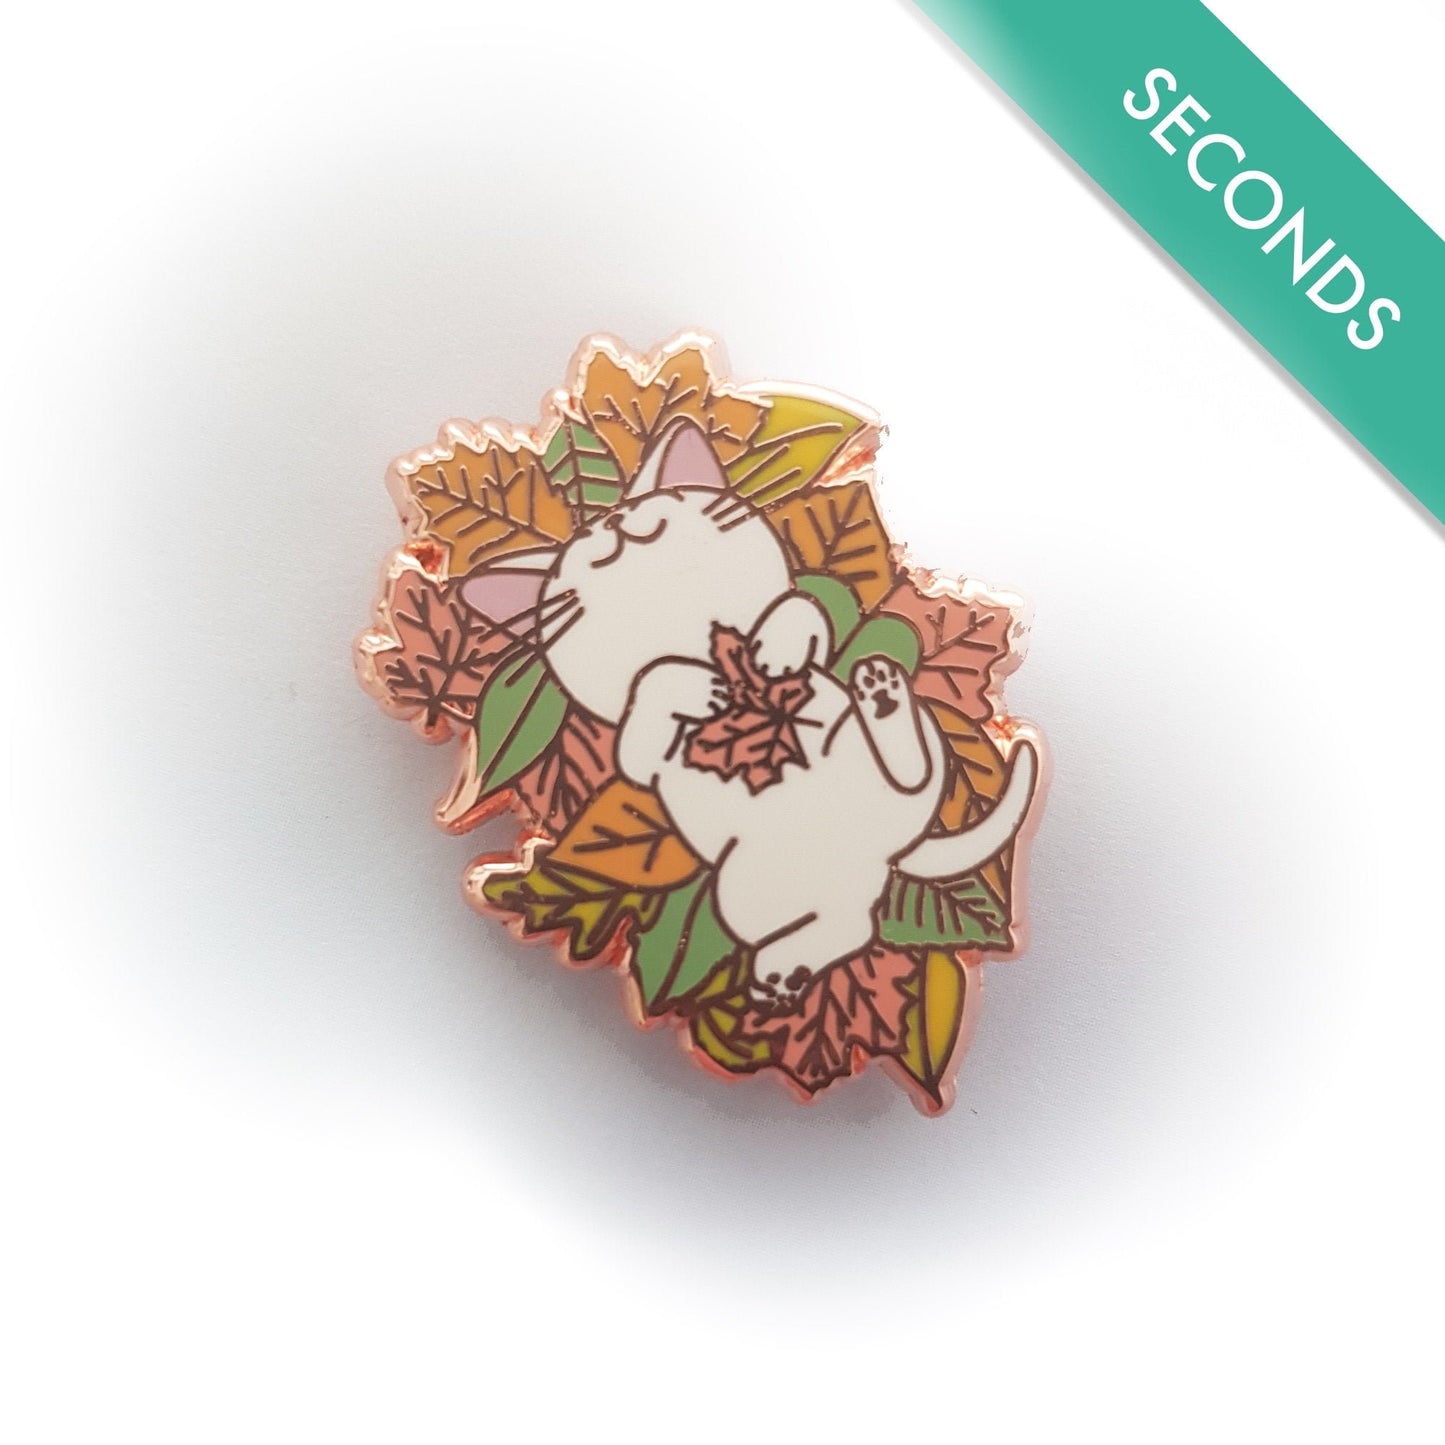 Autumn Leaves Kitty - Pin Seconds - Small Enamel Pin